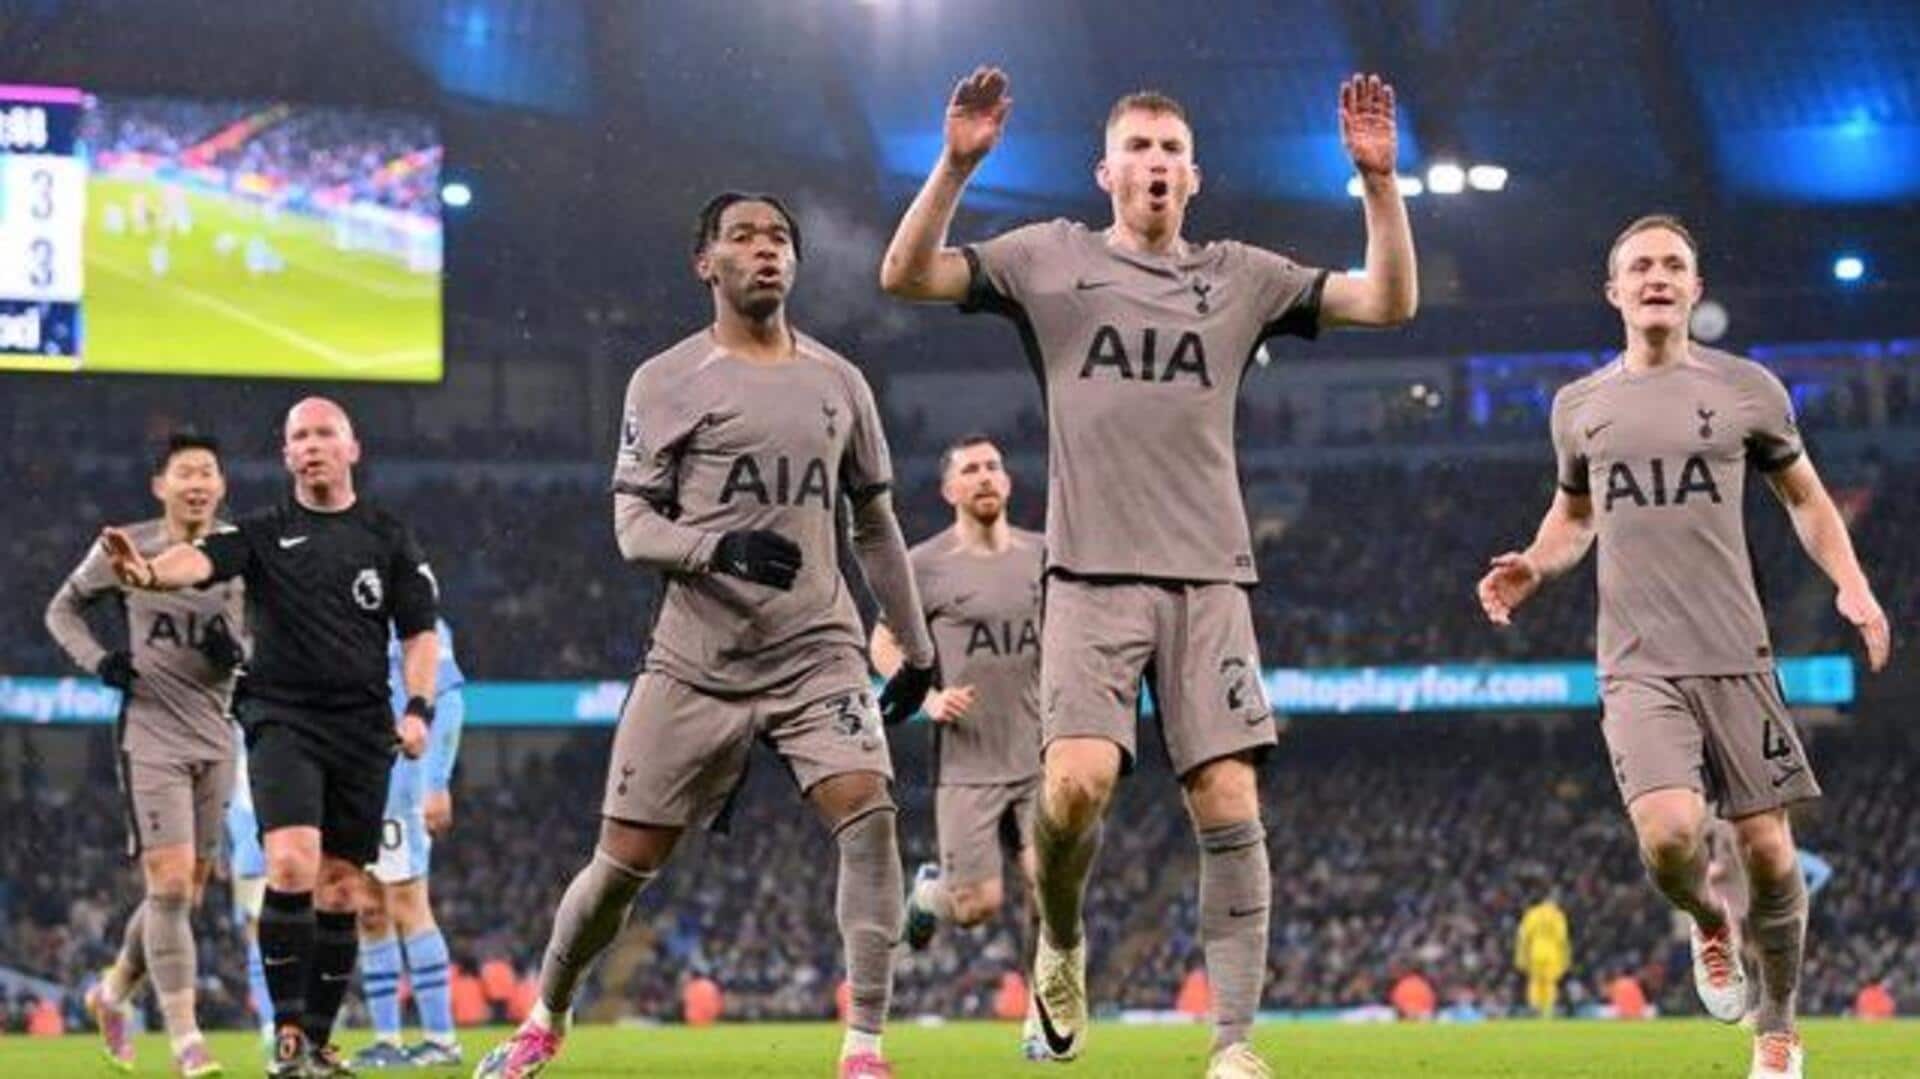 Man City held again in six-goal Spurs thriller, Liverpool move